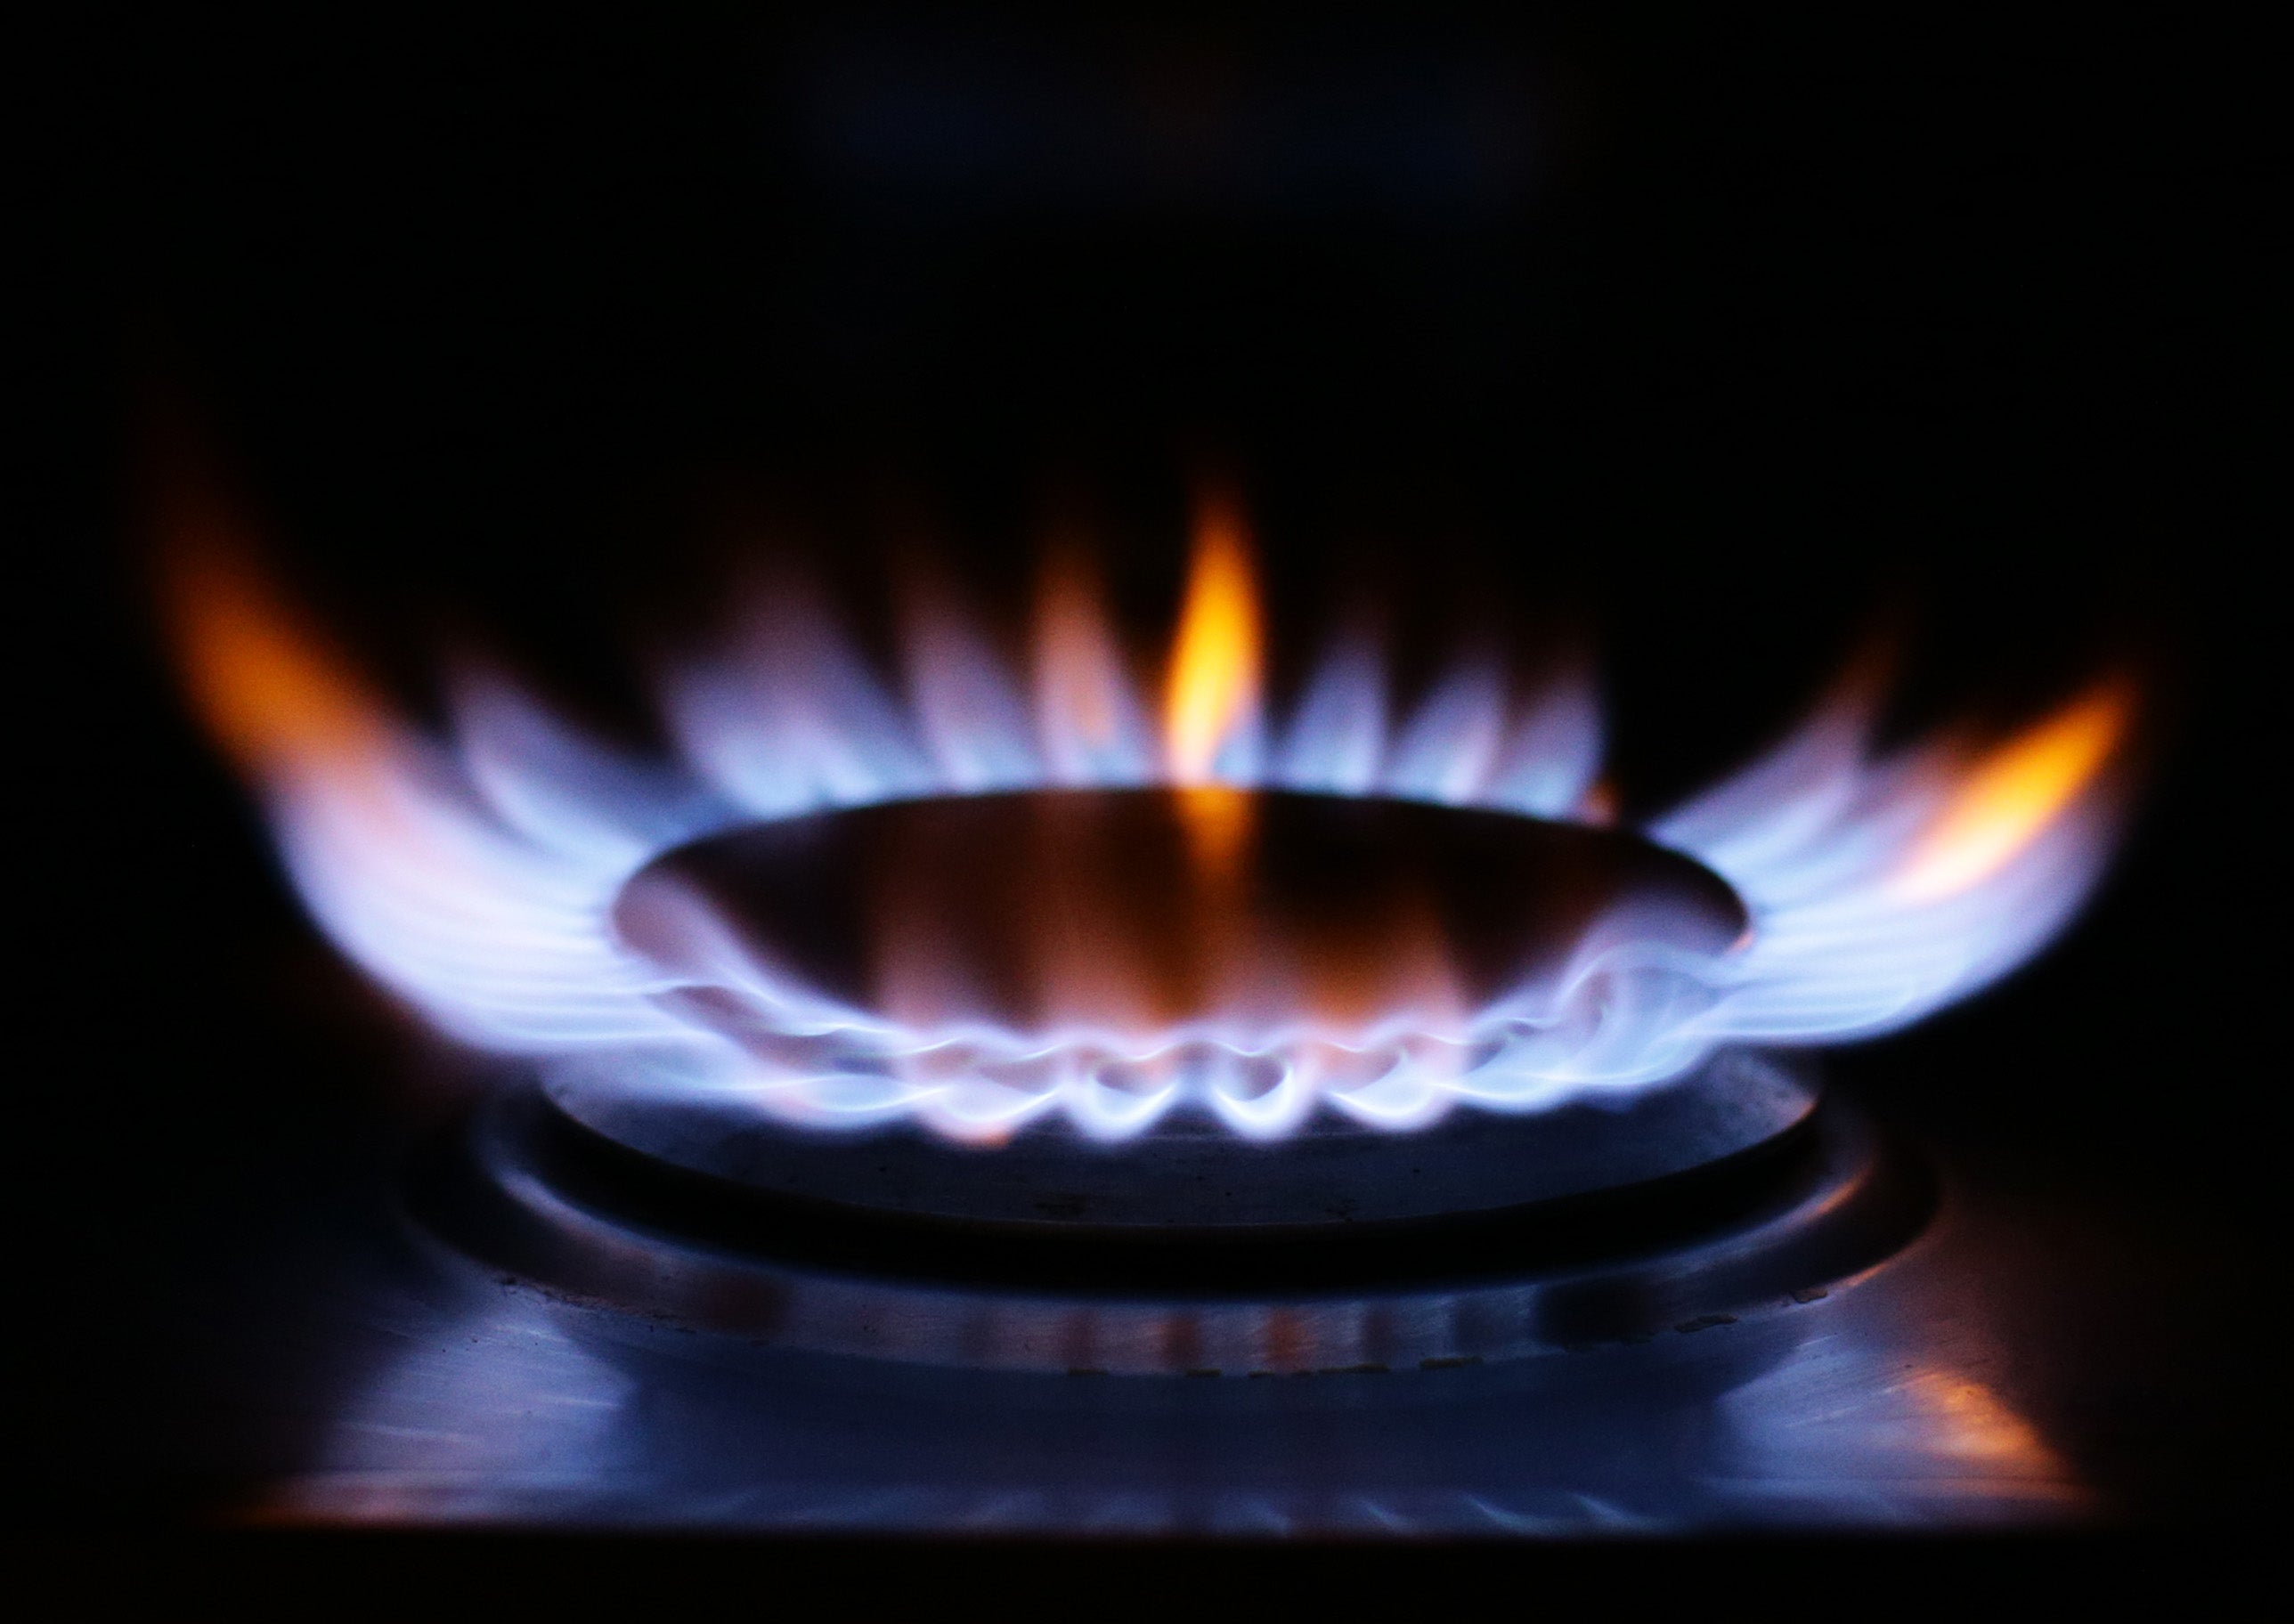 The End Fuel Poverty Coalition estimates that 488,000 more people will be unable to afford to heat their homes